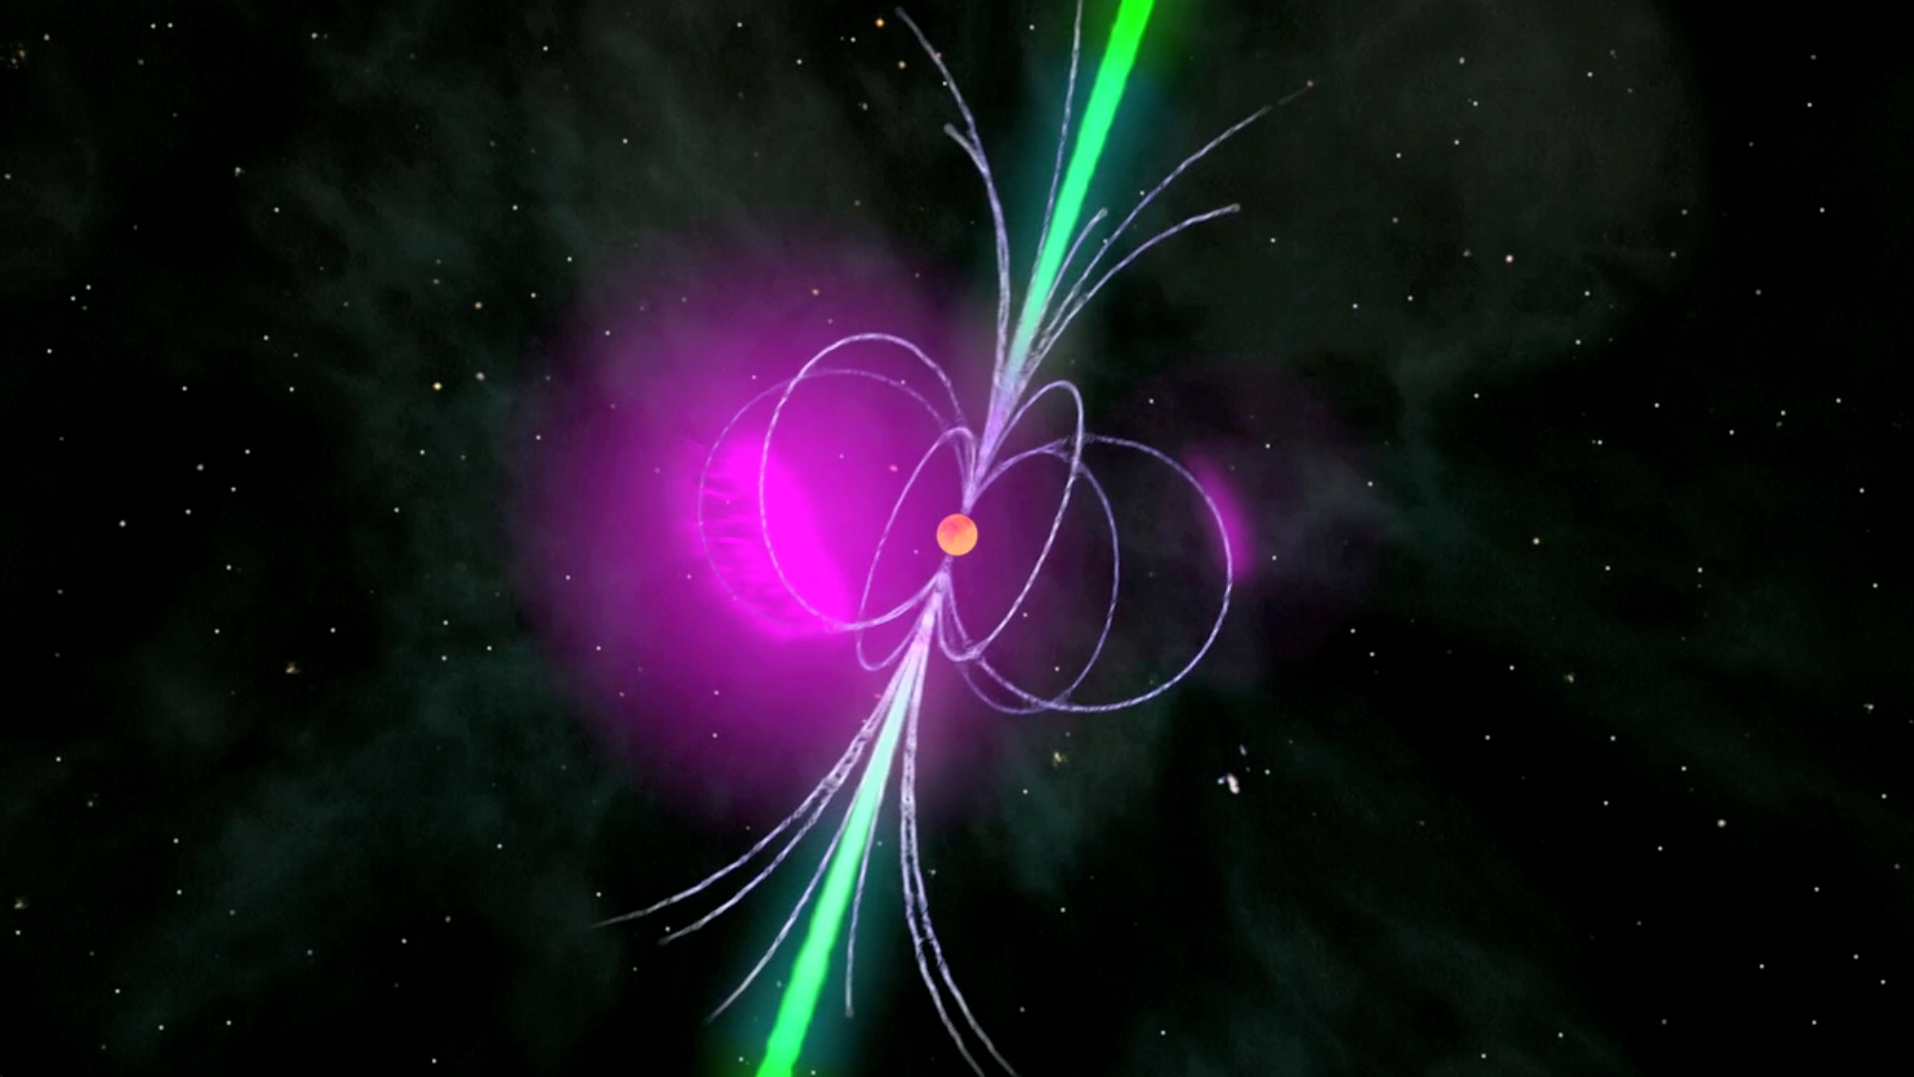 A gamma-ray pulsar is a compact neutron star that accelerates charged particles to relativistic speeds in its extremely strong magnetic field. This process produces gamma radiation (violet) far above the surface of the compact remains of the star, for example, while radio waves (green) are emitted over the magnetic poles in the form of a cone. The rotation moves the emission regions across the terrestrial line of sight, making the pulsar light up periodically in the sky.